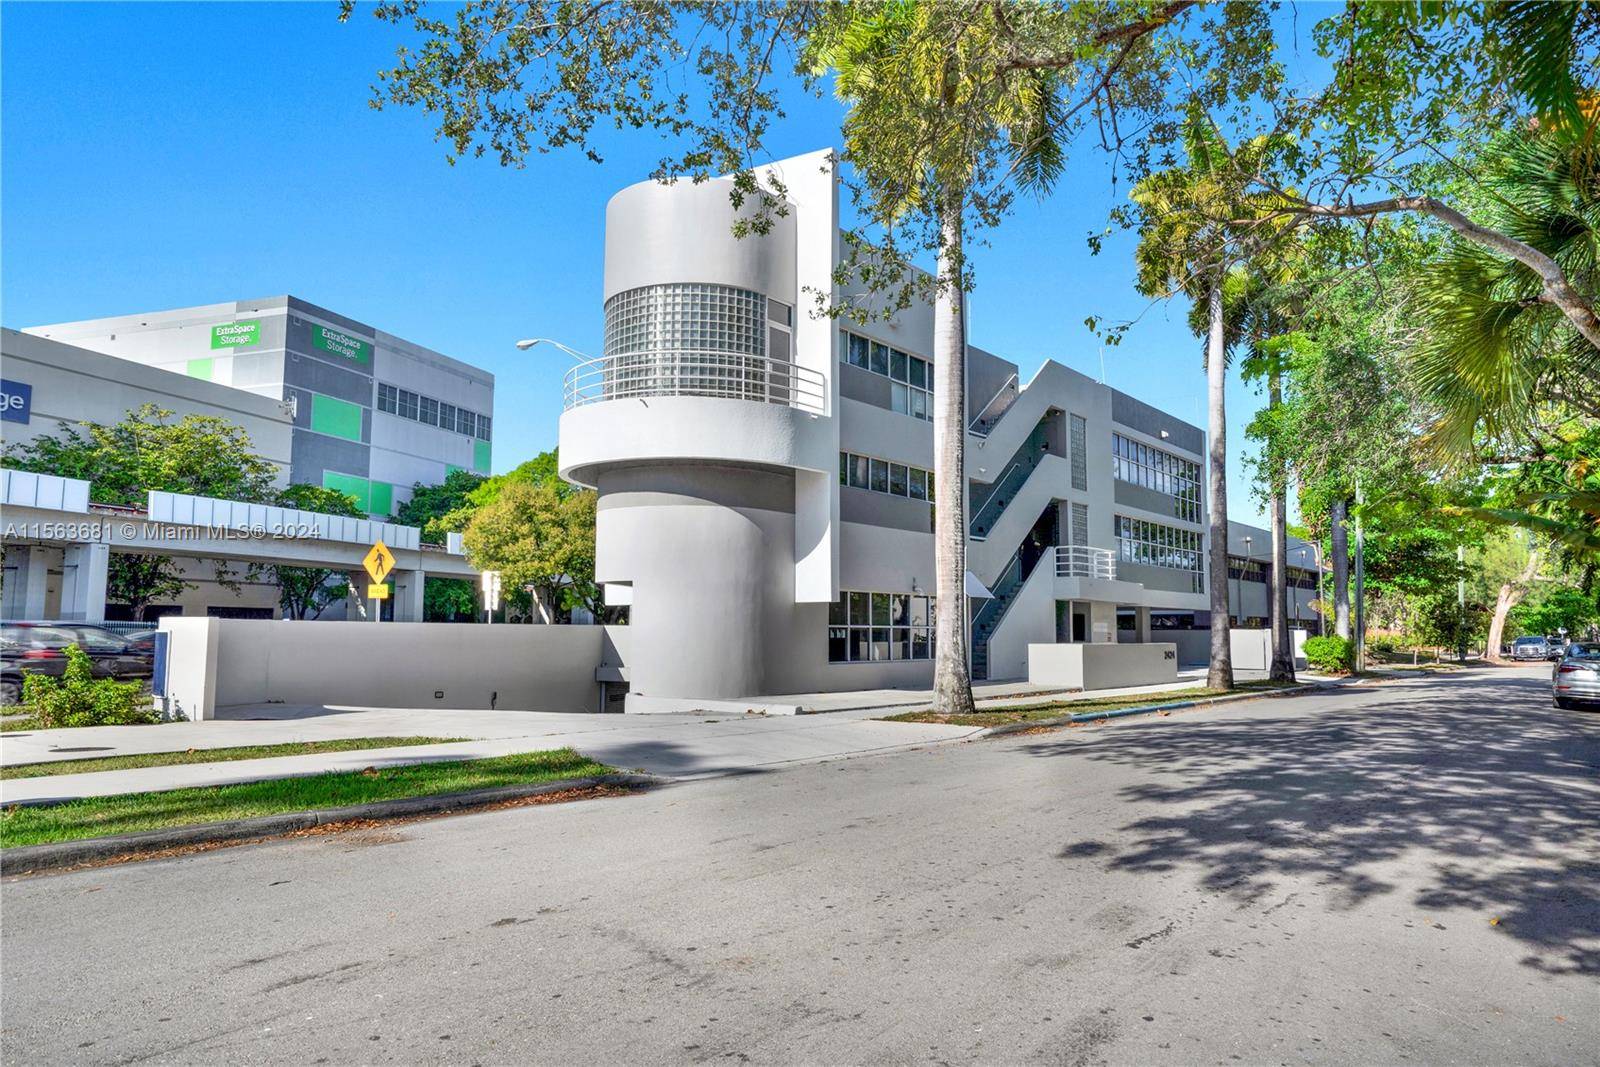 Own this Building and open the doors to a location worthy of admiration, Coconut Grove.